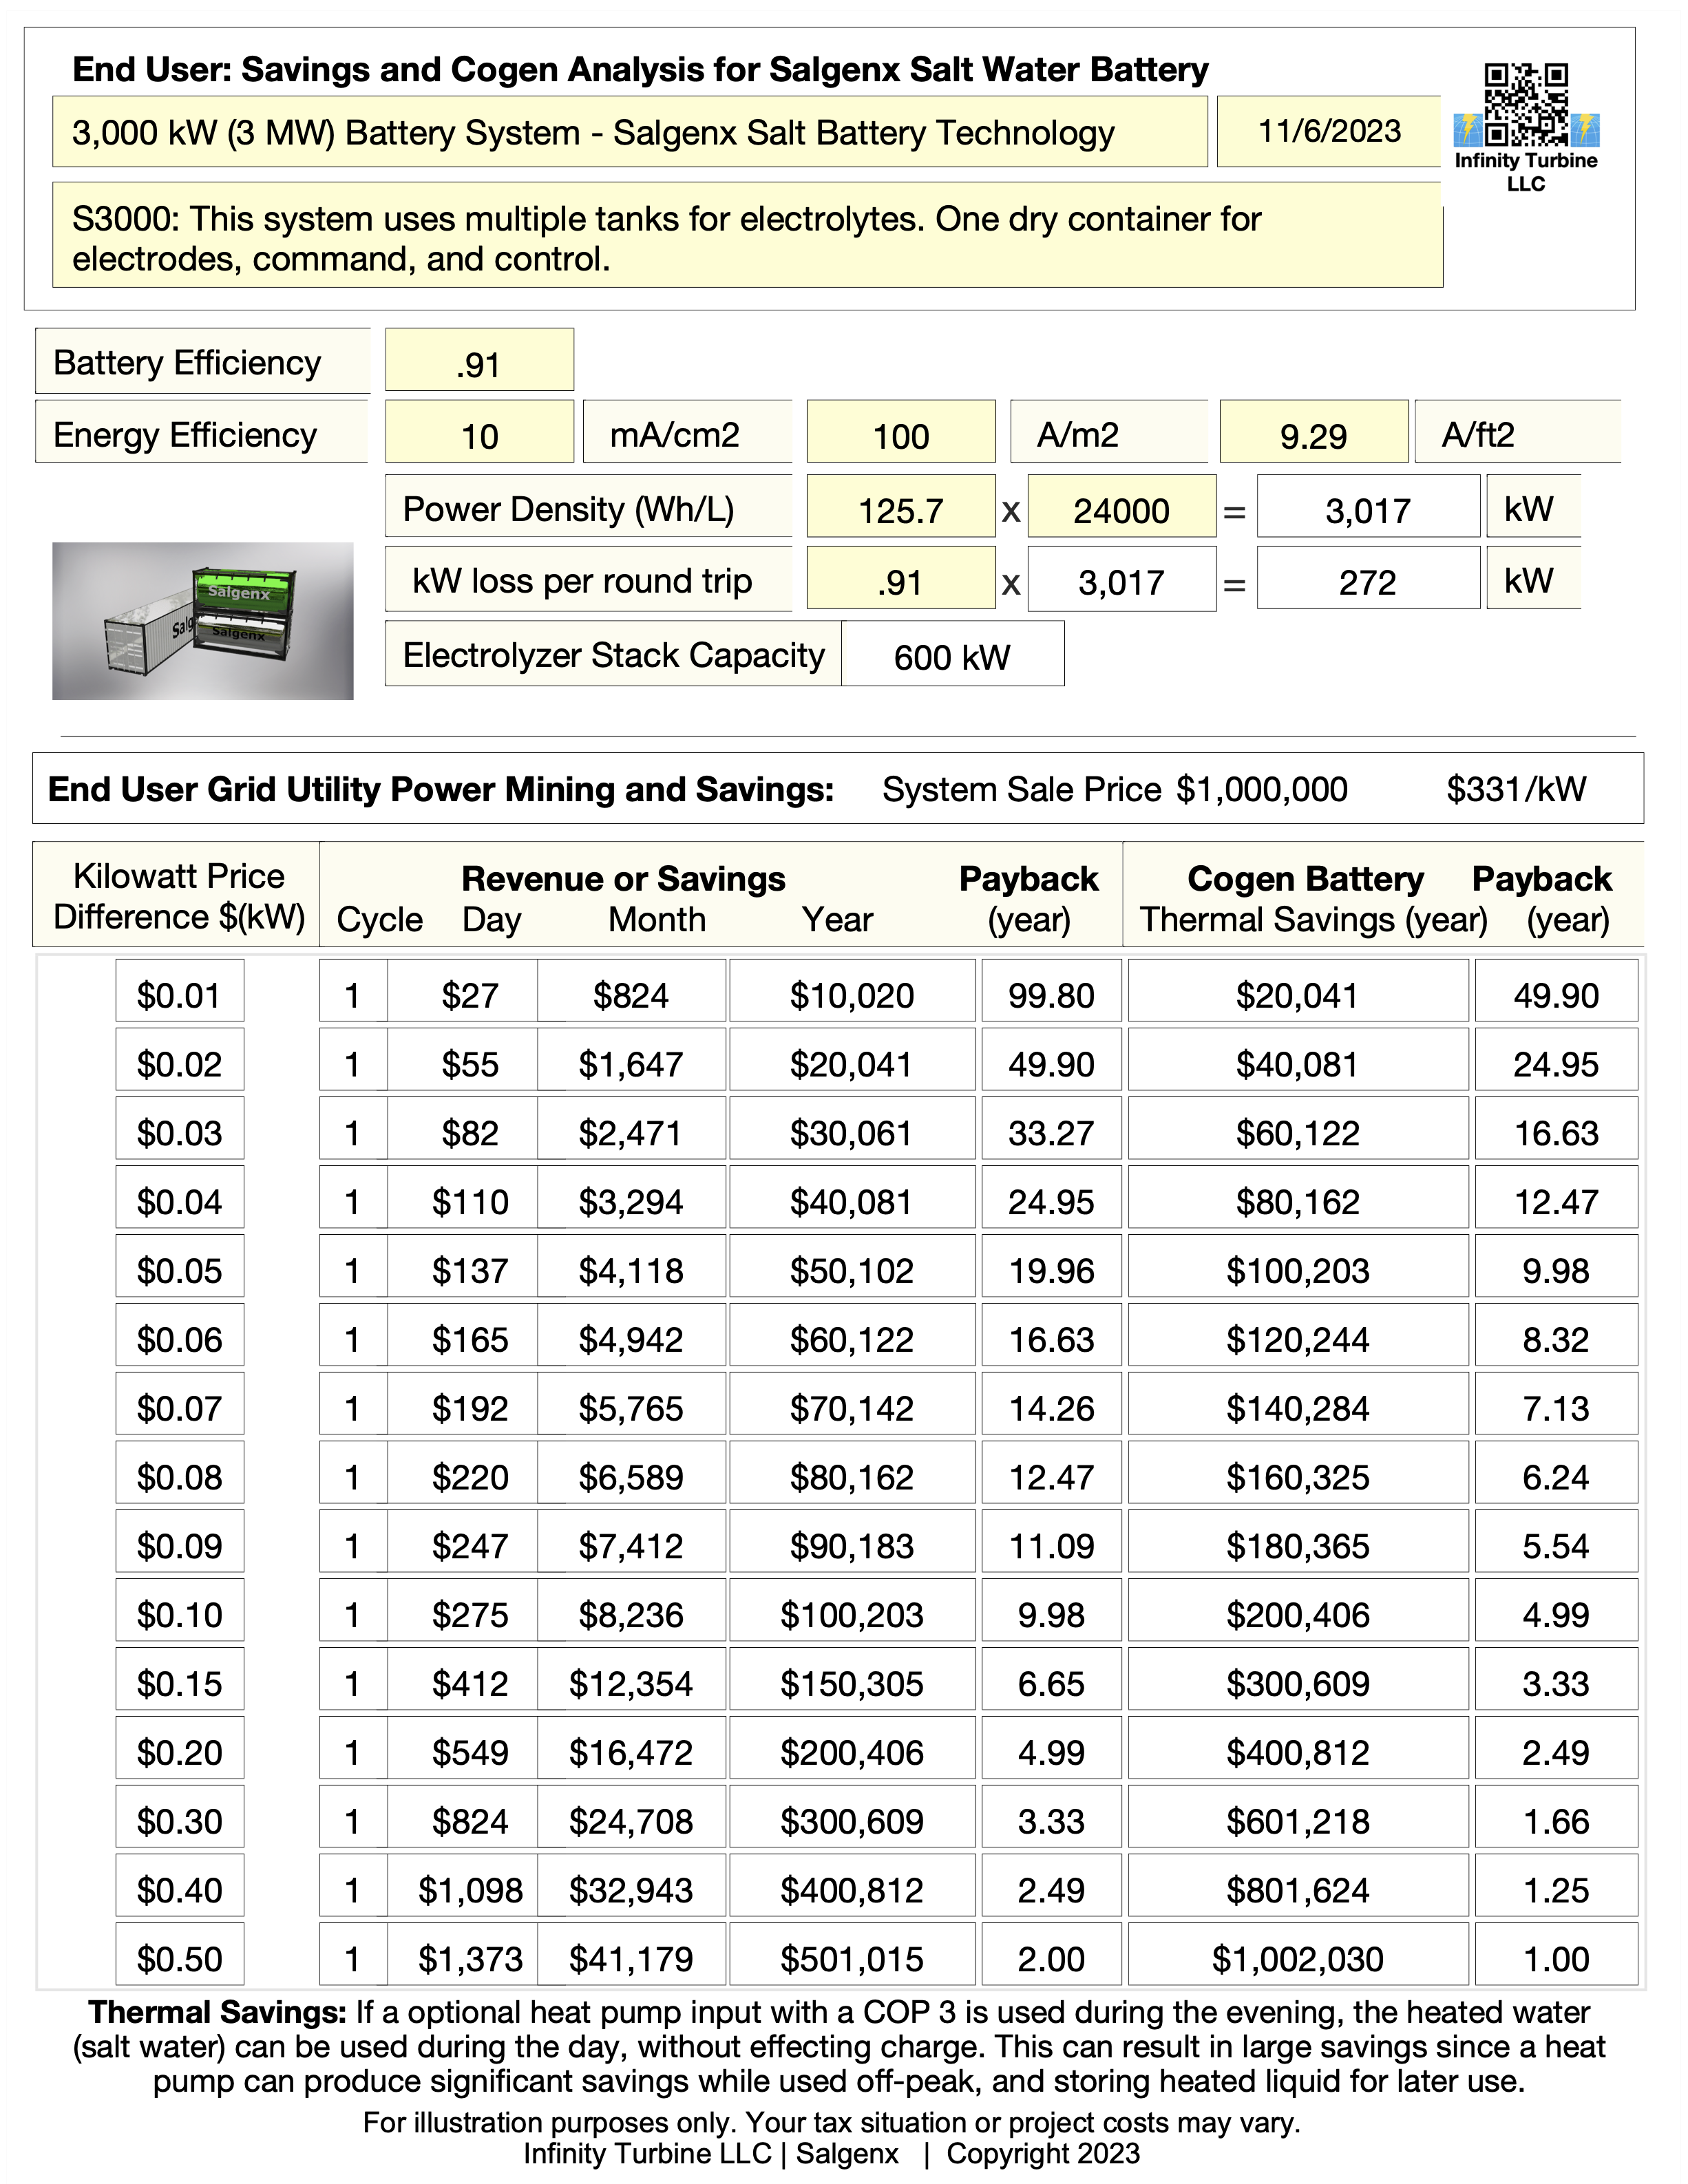 End User Grid Power Mining and Cogen Thermal Savings Chart